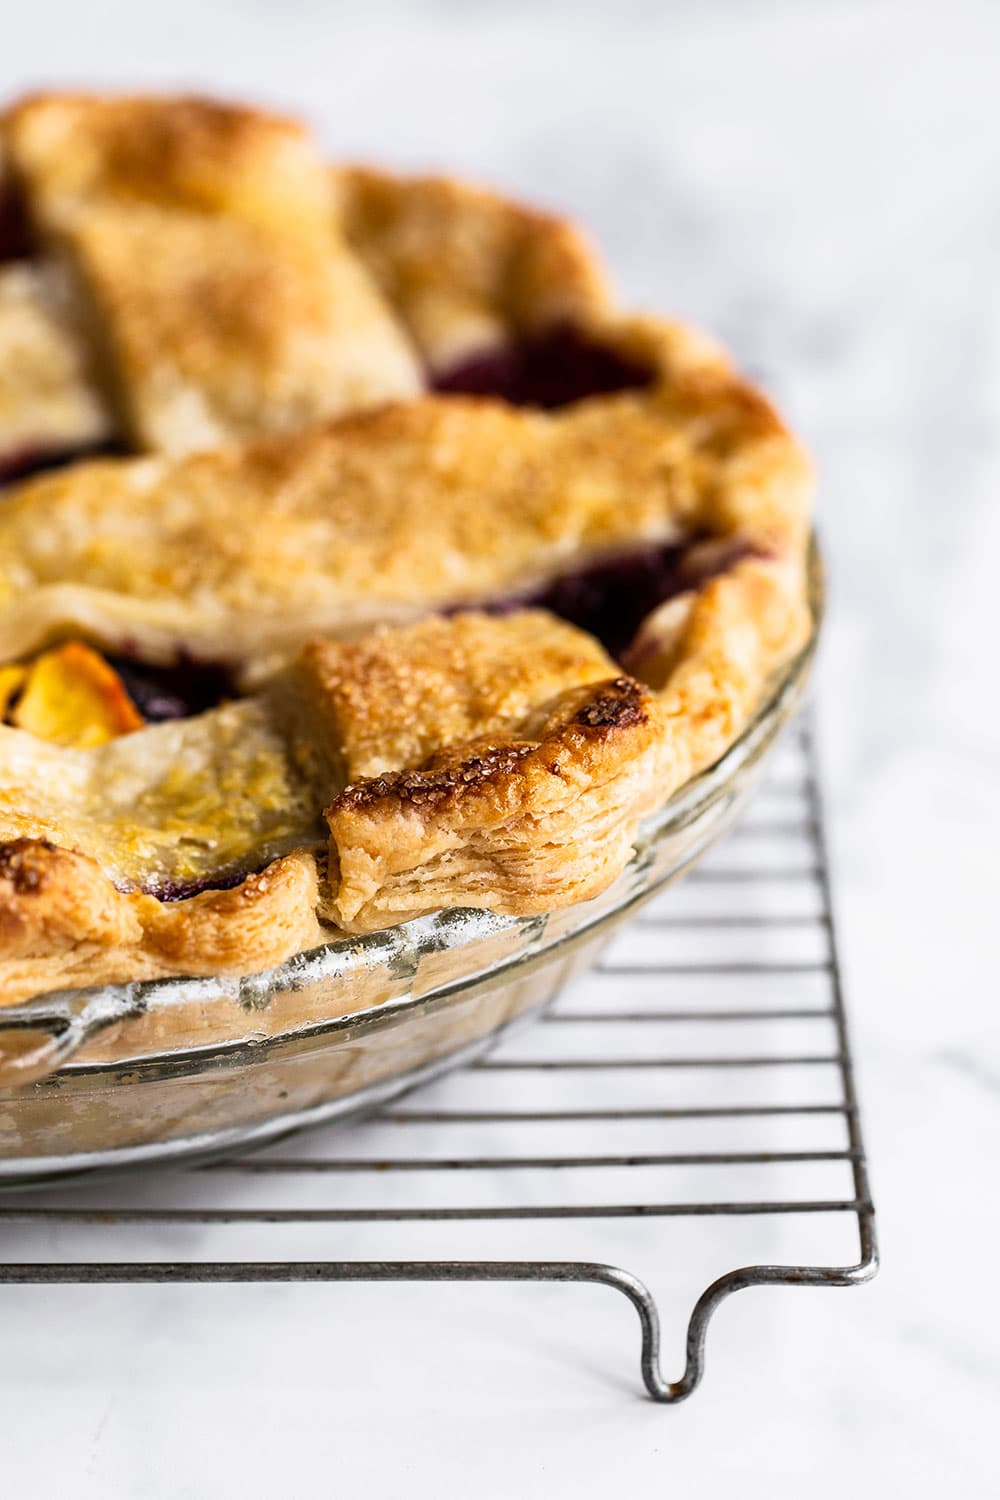 Fruit pie with visibly flaky pie crust